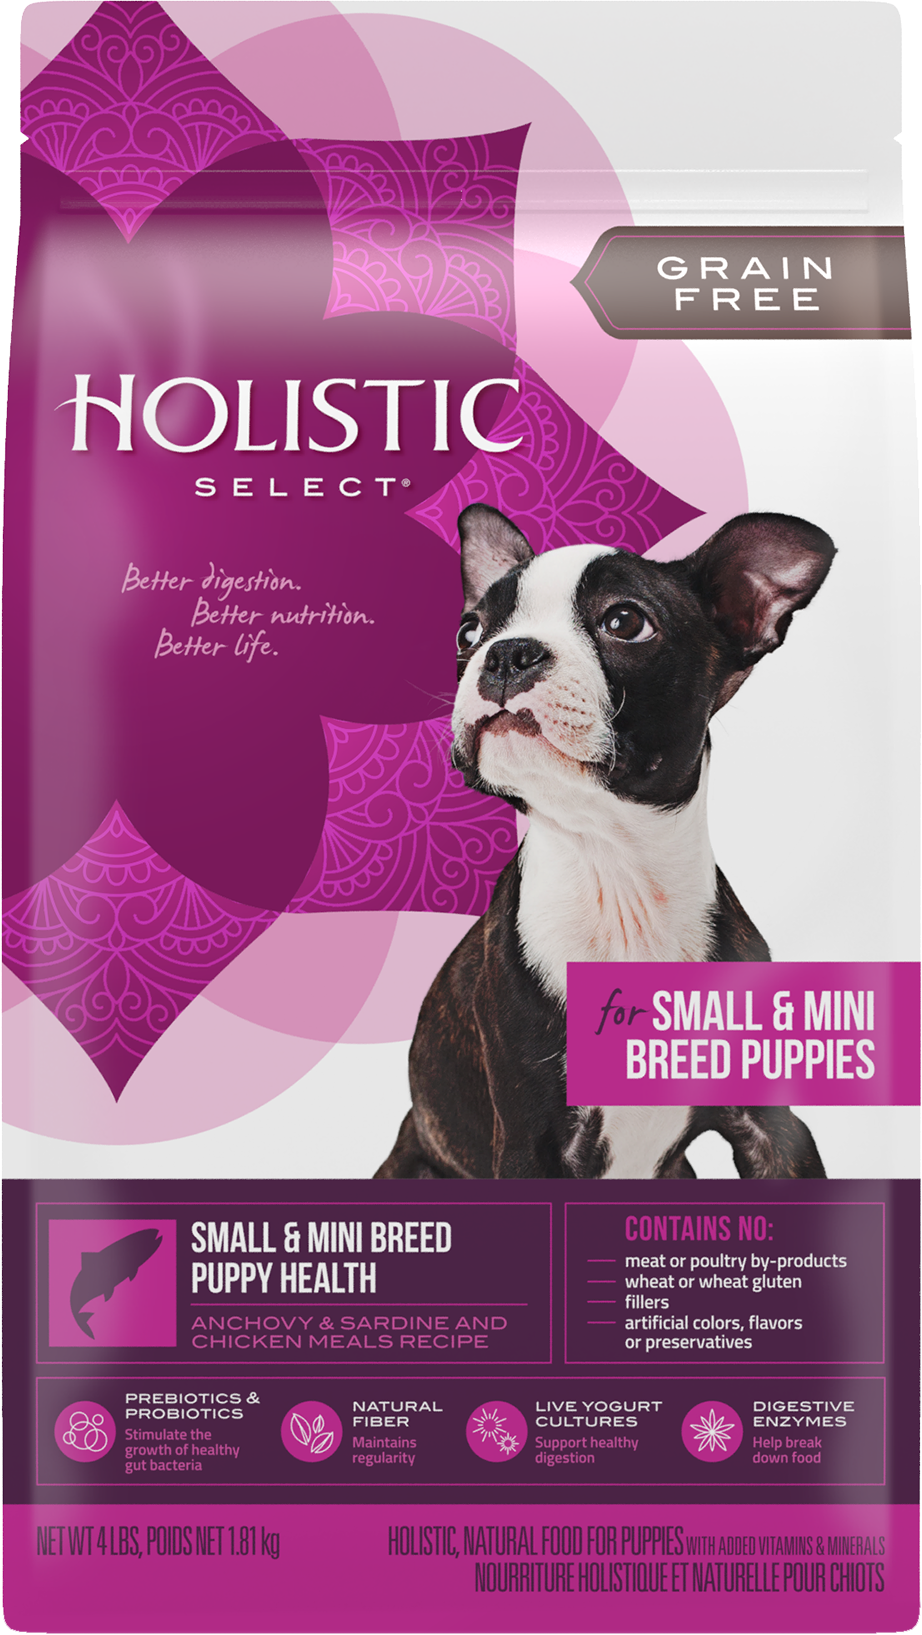 Grain Free Small & Mini Breed Puppy Health product packaging image thumbnail 3